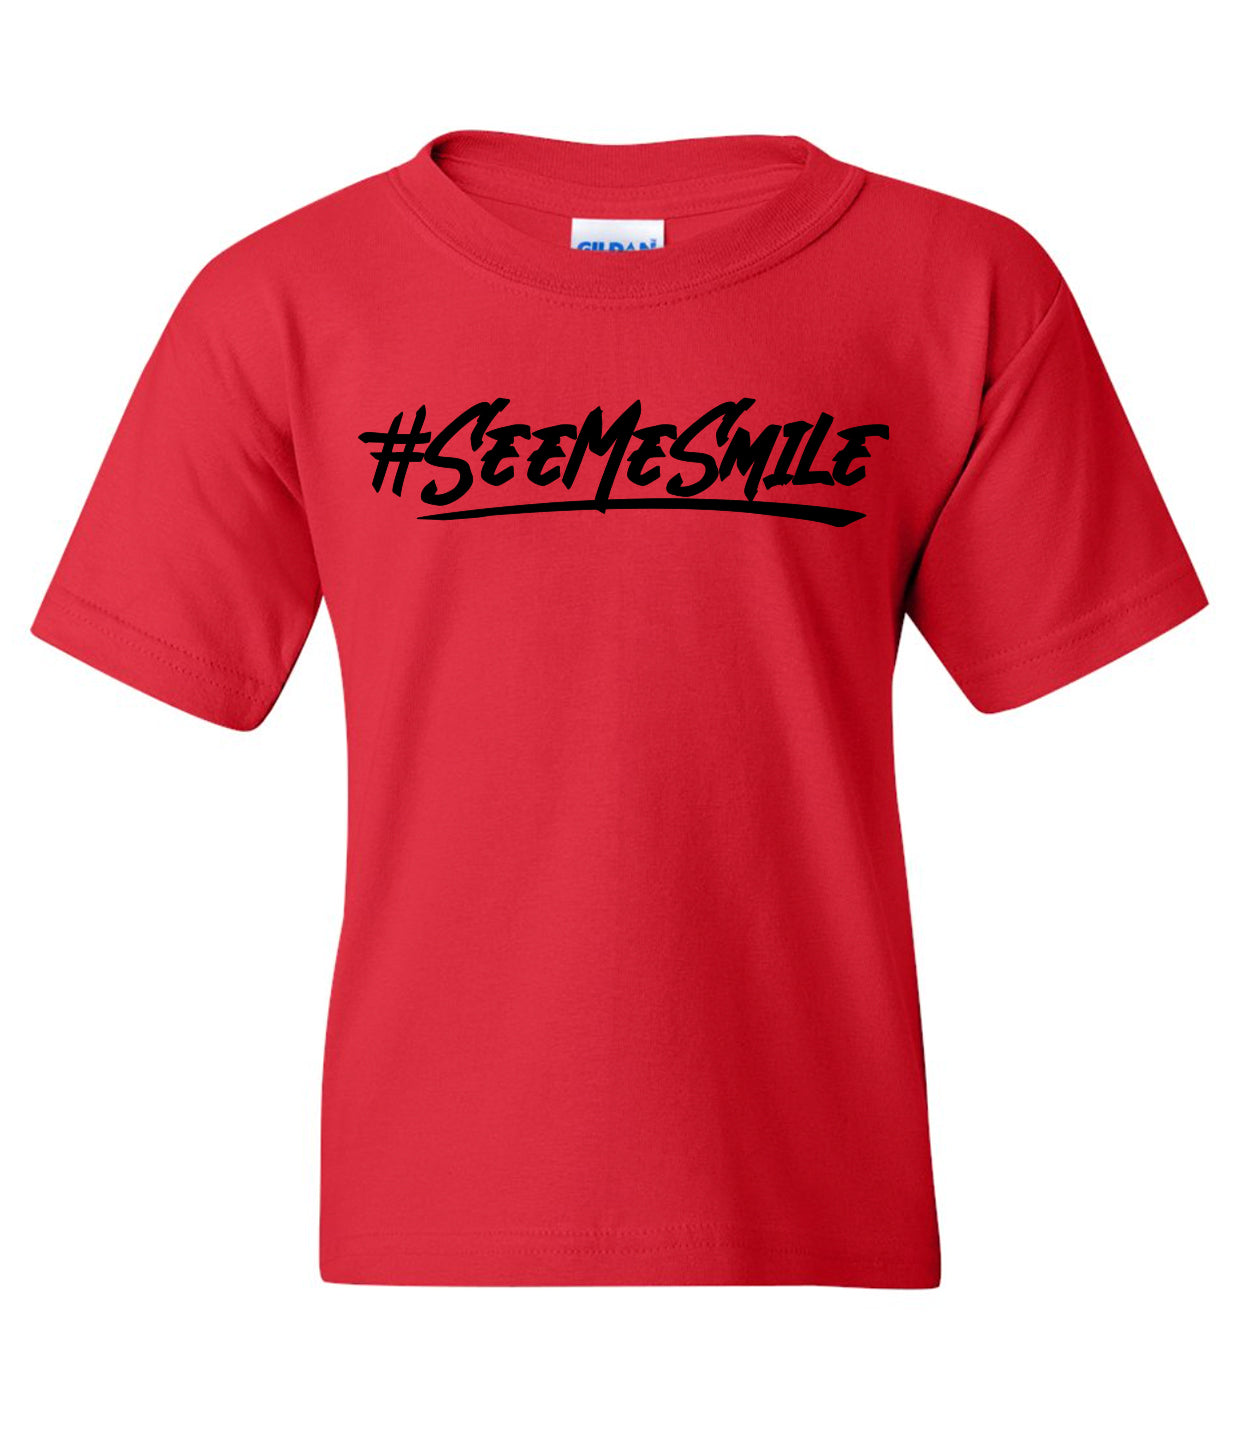 See Me Smile Youth Tee